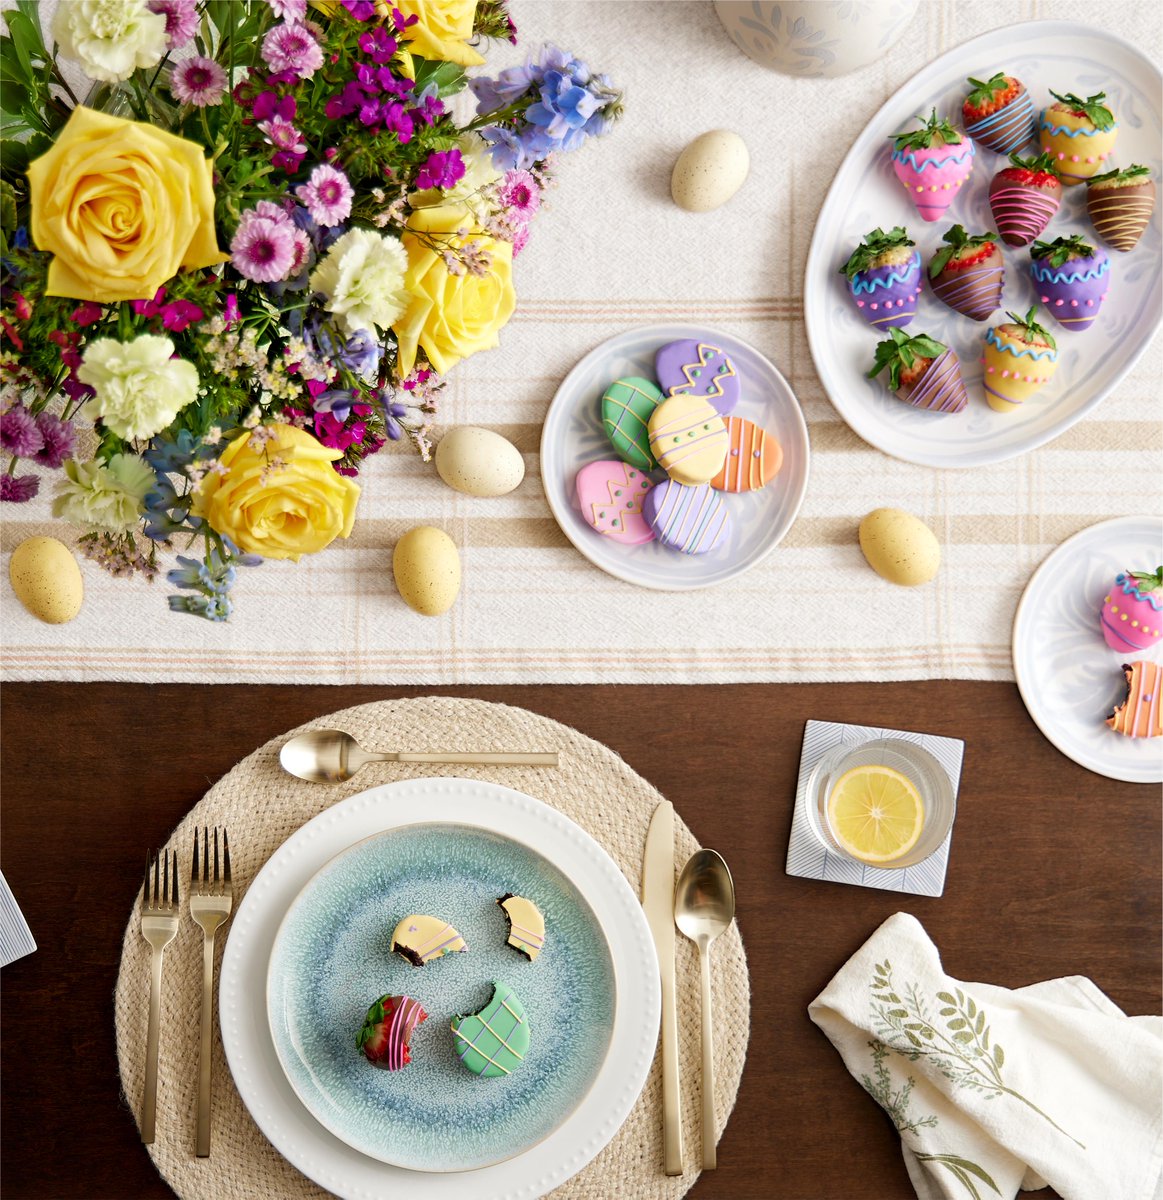 Wishing you an egg-stra special Easter gathered together with the ones you love 🌼 Tell us your favorite Easter tradition.